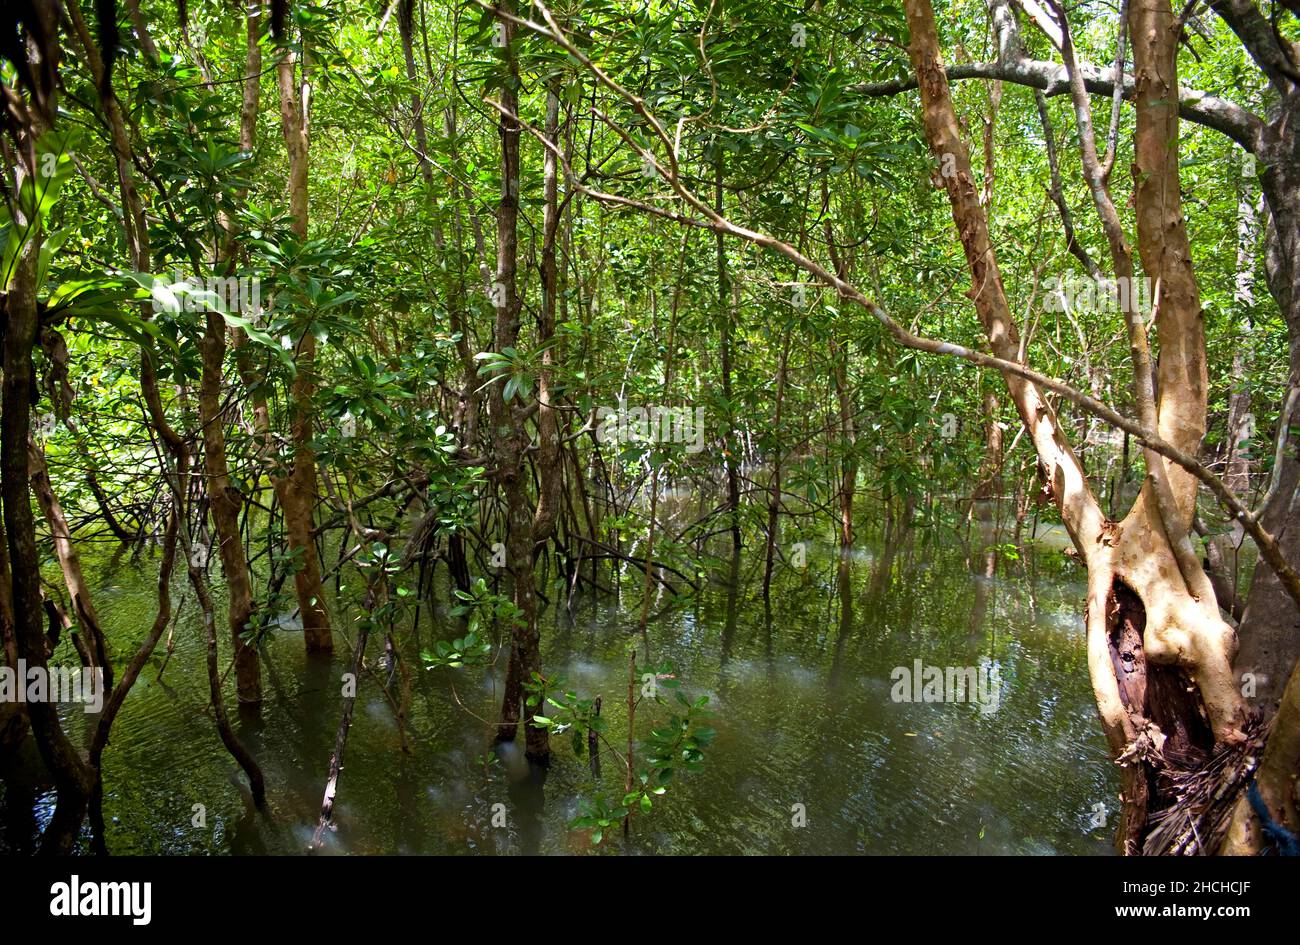 by longtail boat through the mangrove coast at Ao Luk Mangrove coast, Ao Luk, Ao Luk, Krabi, Thailand Stock Photo